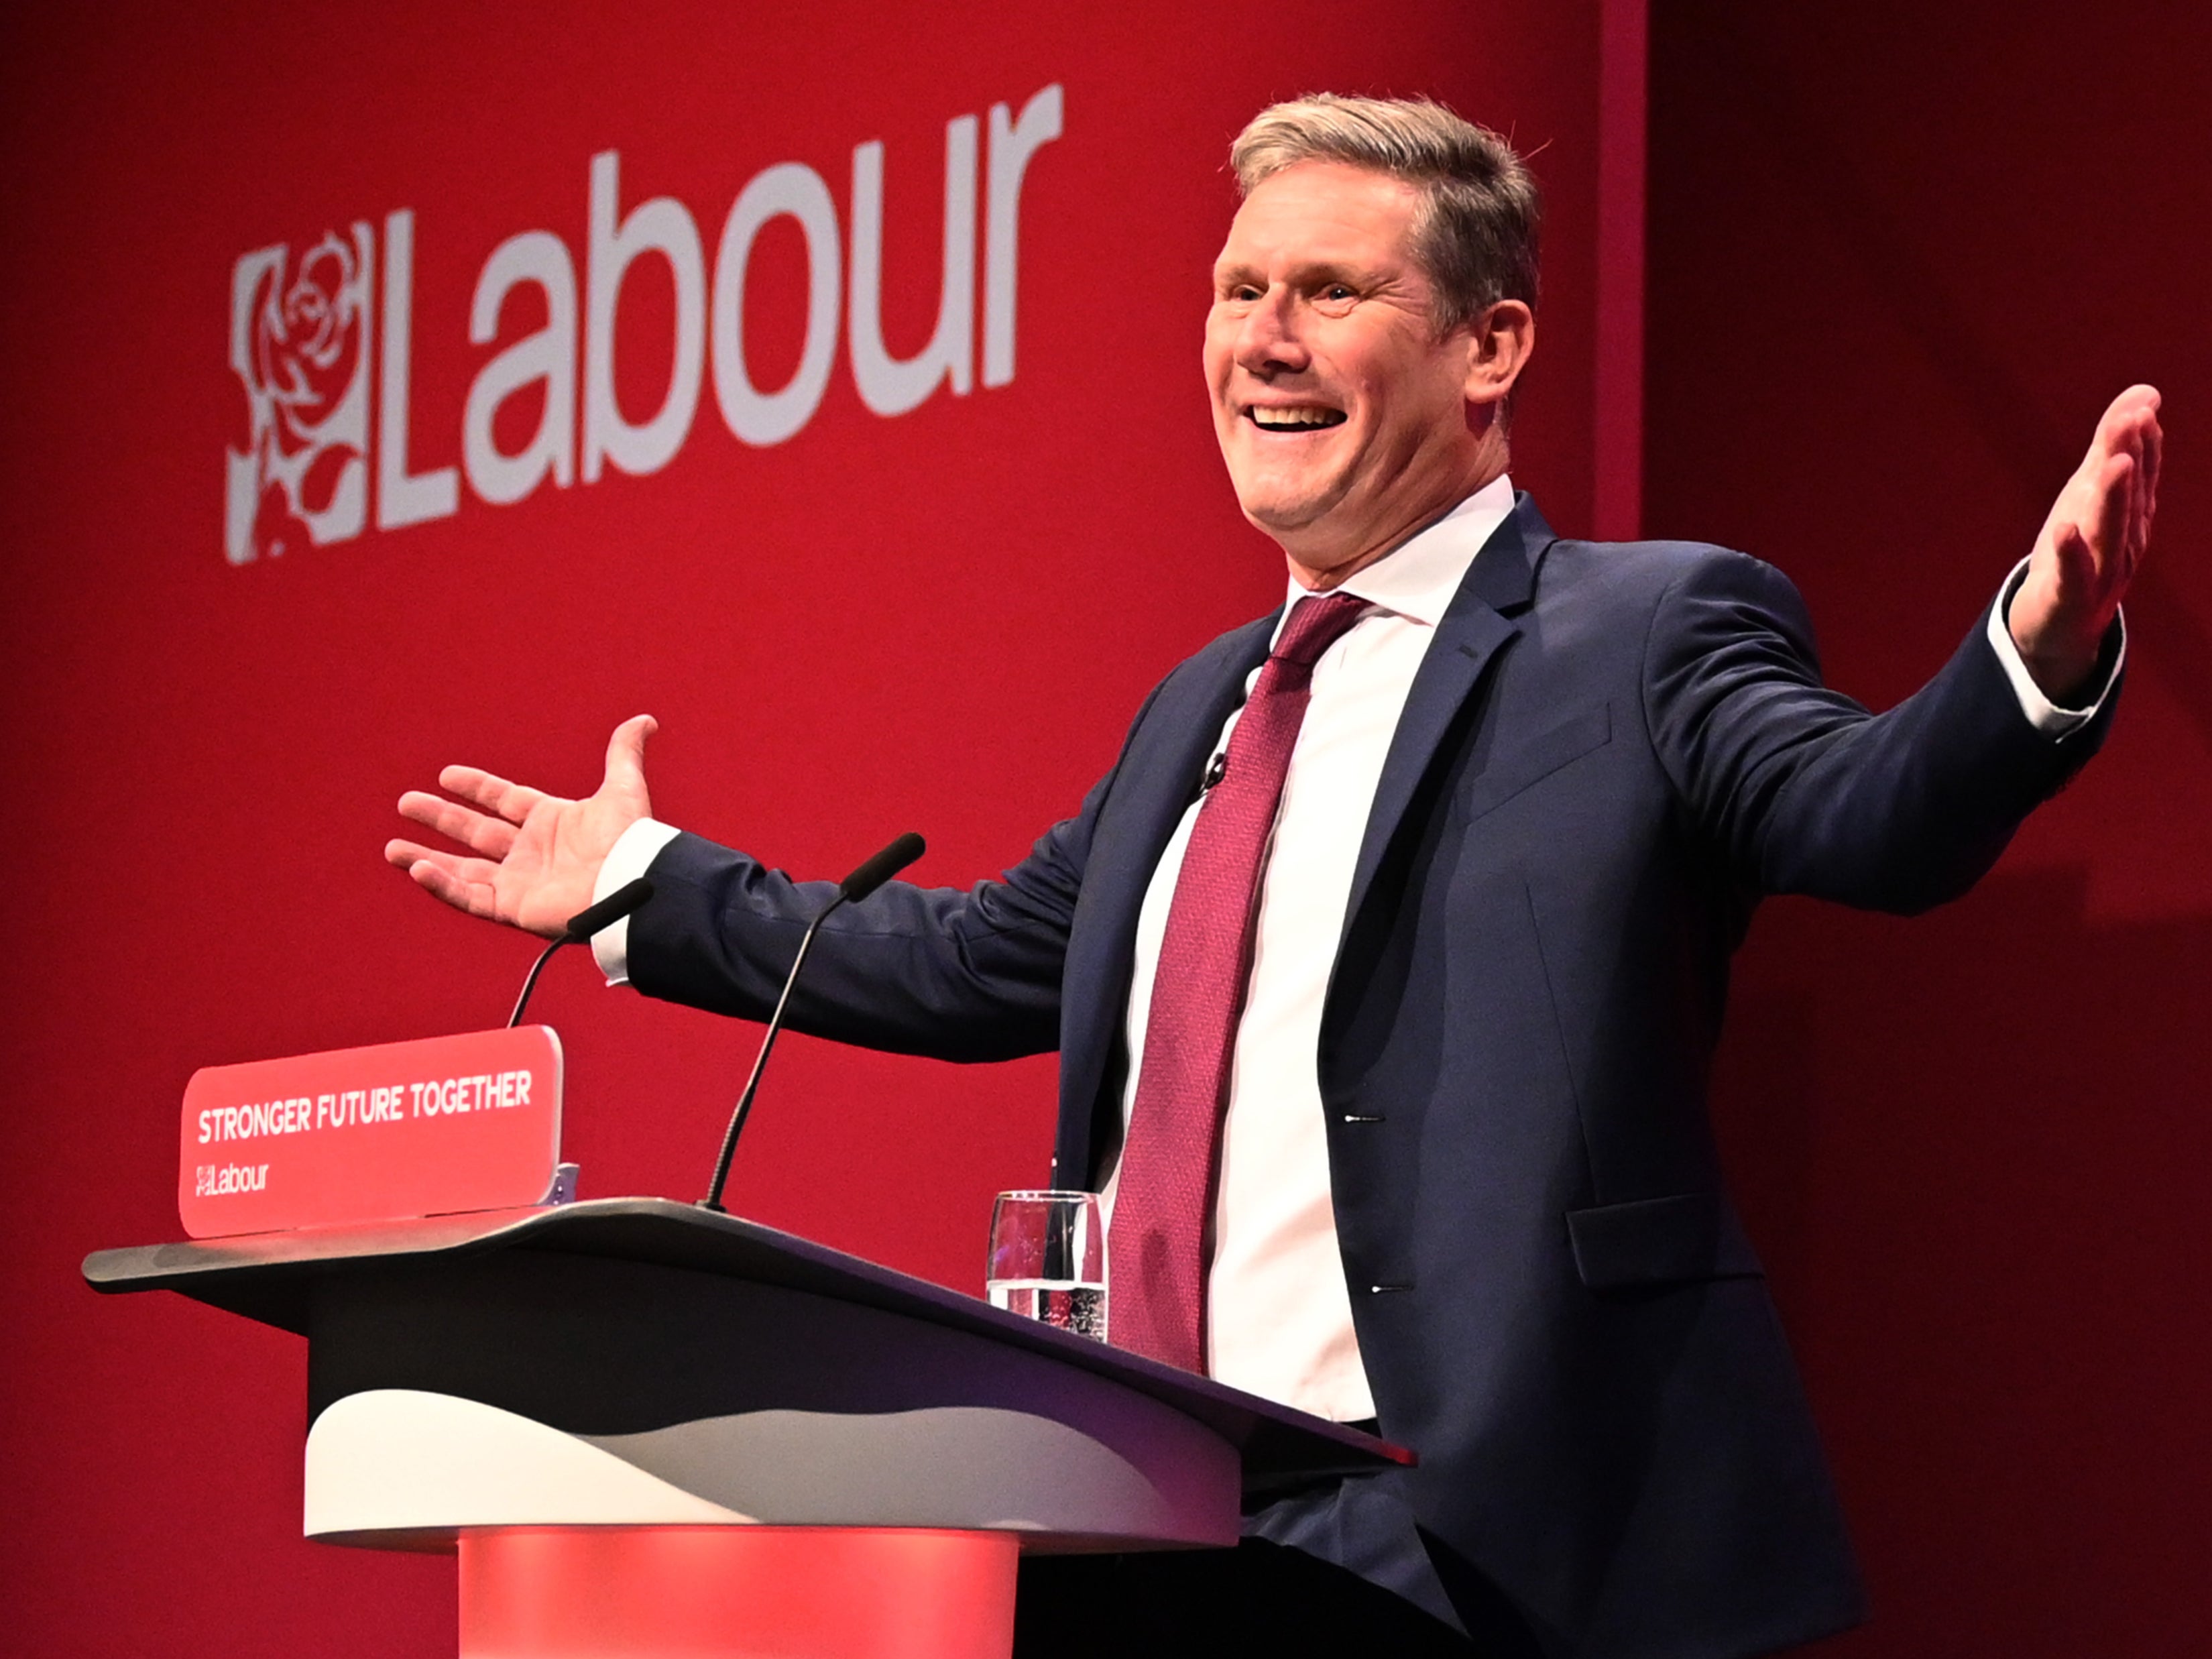 The Labour leader gives his speech at conference on Wednesday